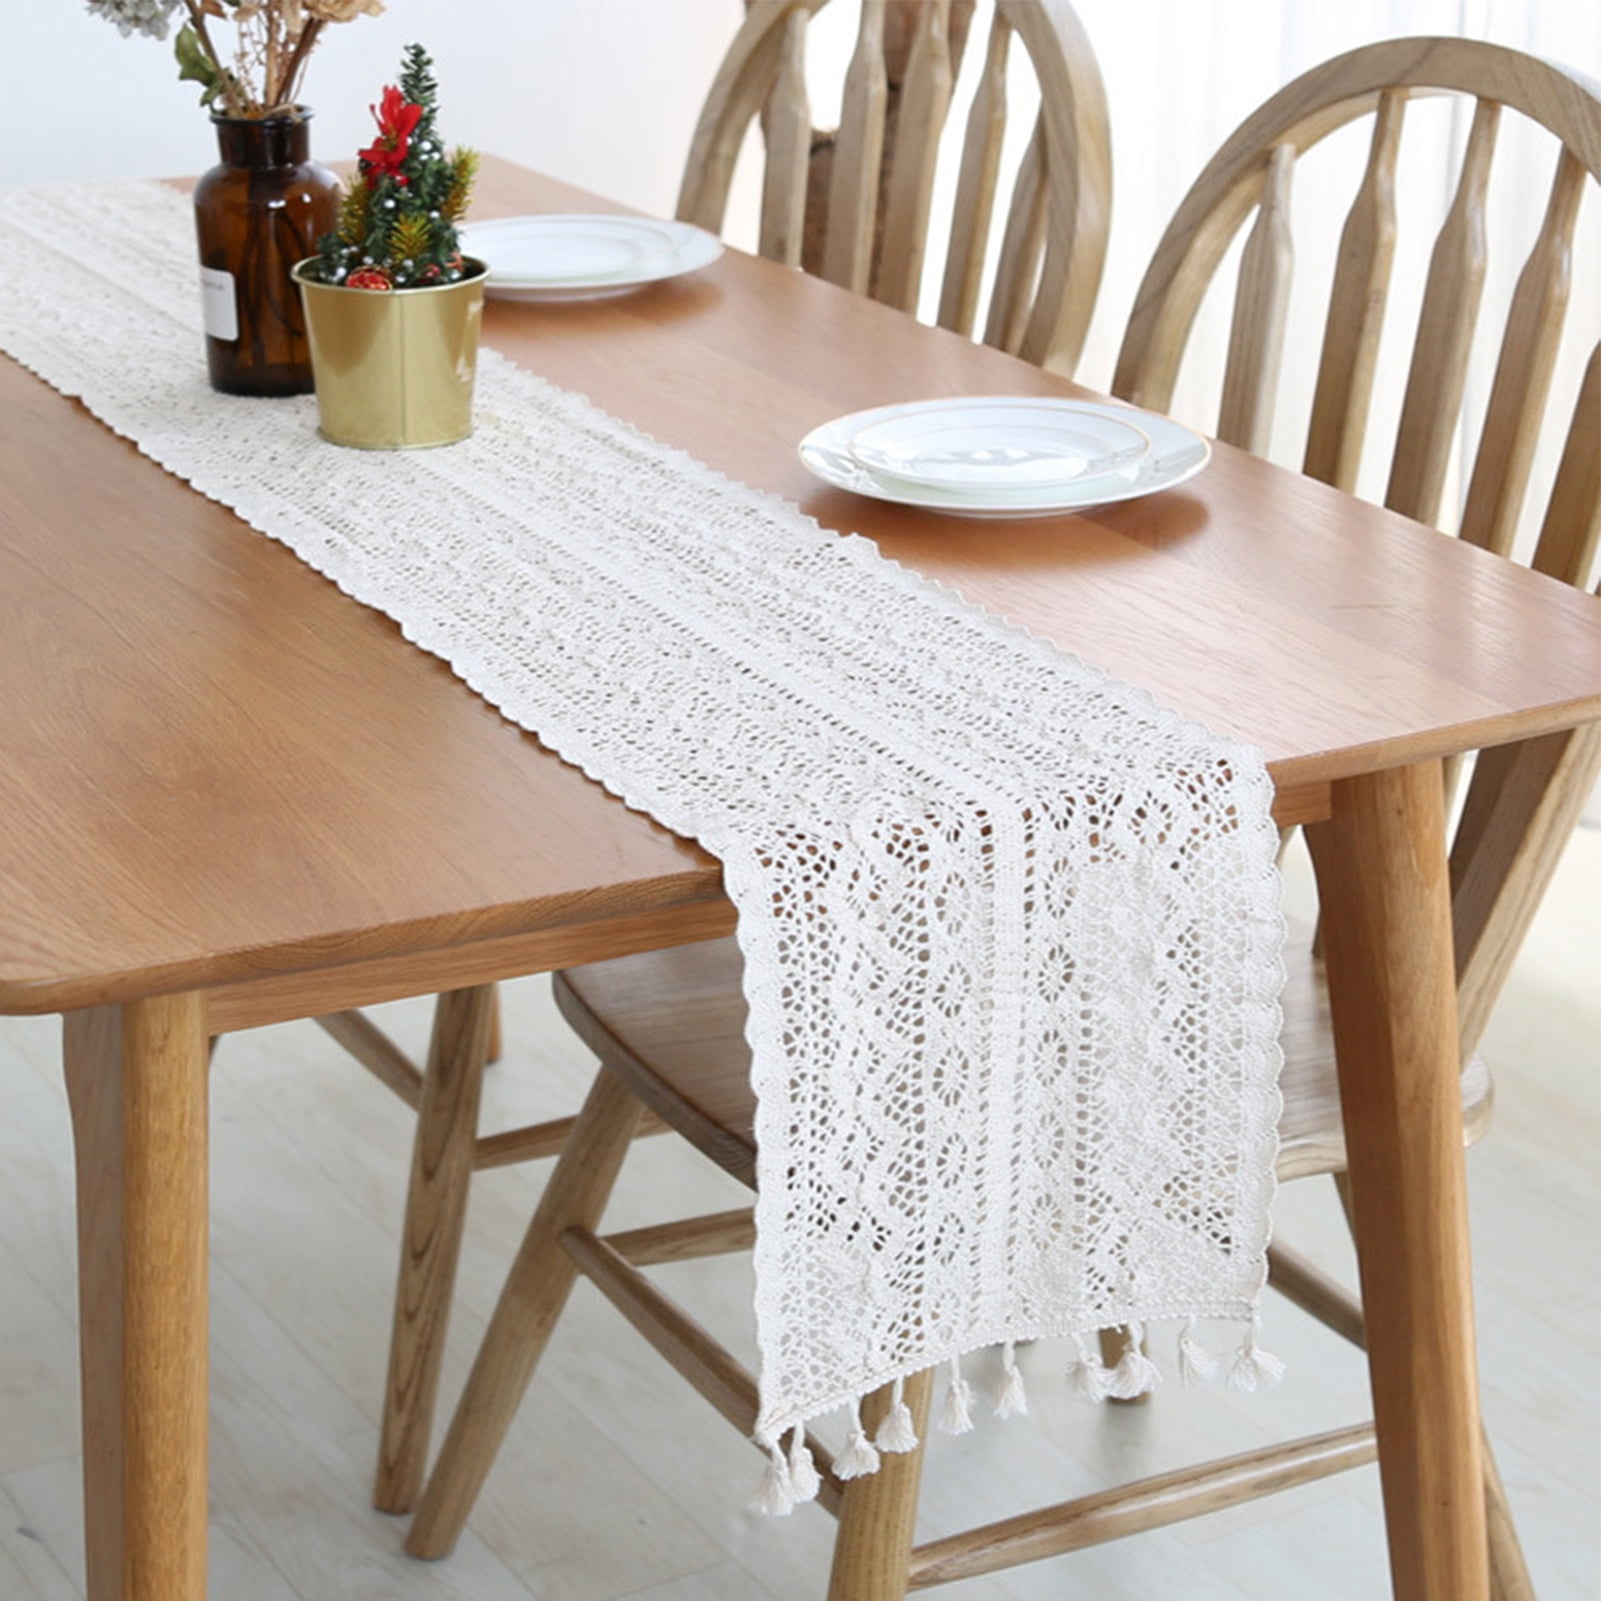 wedding home decor custom farmhouse country table runner Family name anniversary Personalized name doily